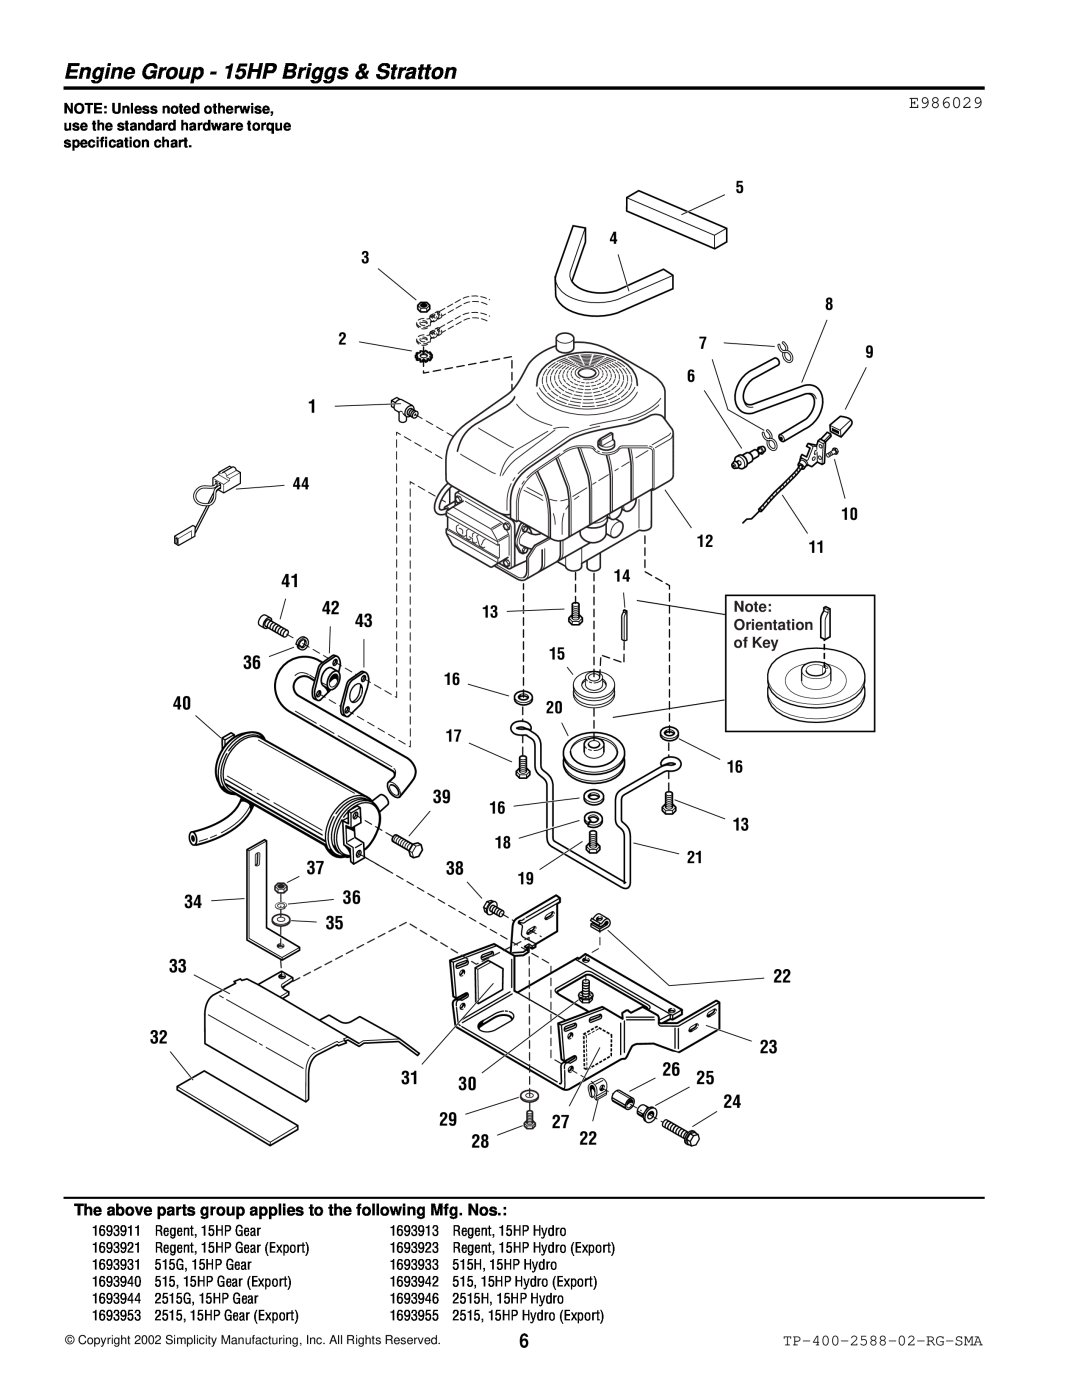 Simplicity 500 Series Engine Group - 15HP Briggs & Stratton, E986029, TP-400-2588-02-RG-SMA, NOTE Unless noted otherwise 